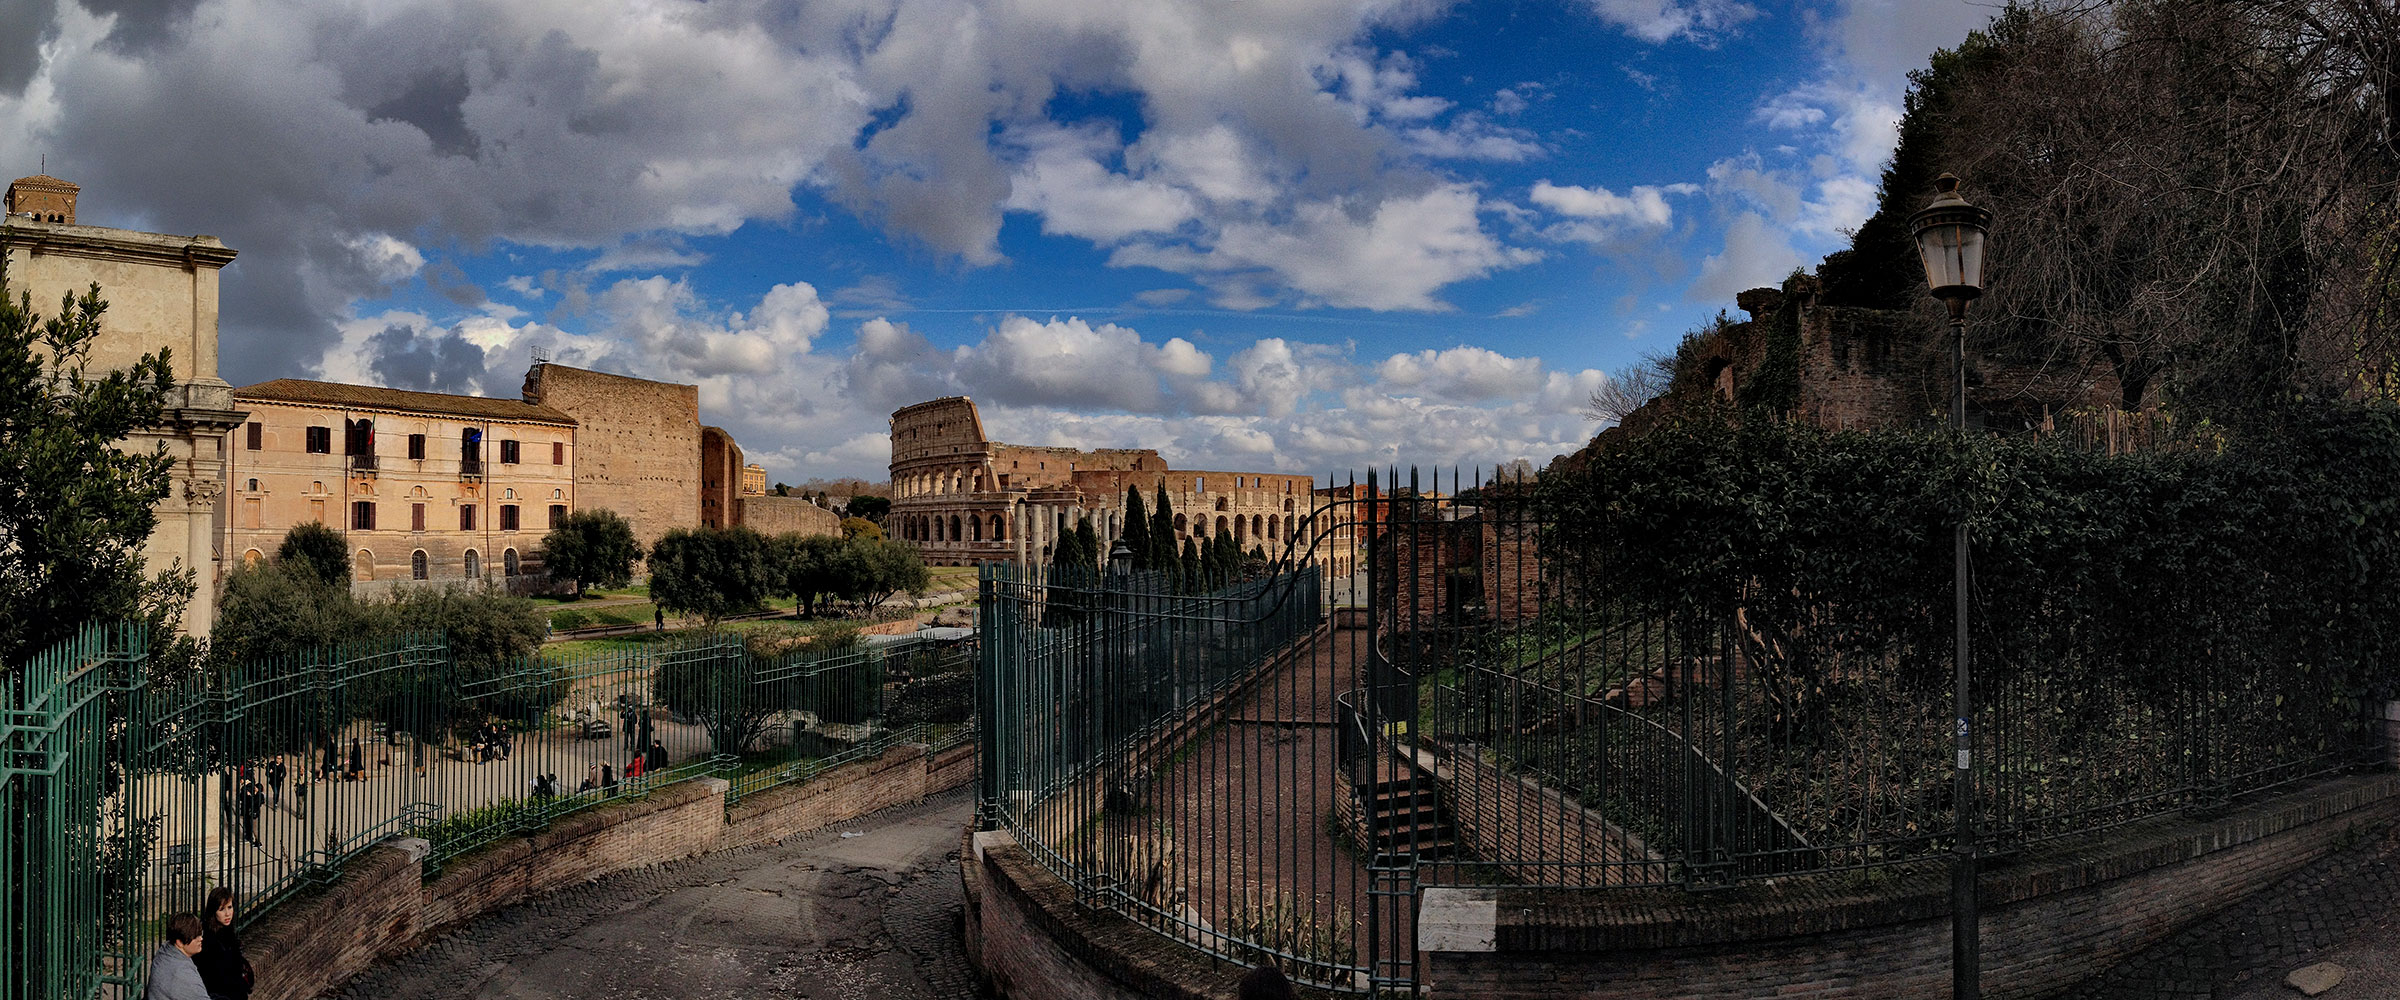 PANORAMA DIARY | Iphoneography blog | Rome, Colosseo